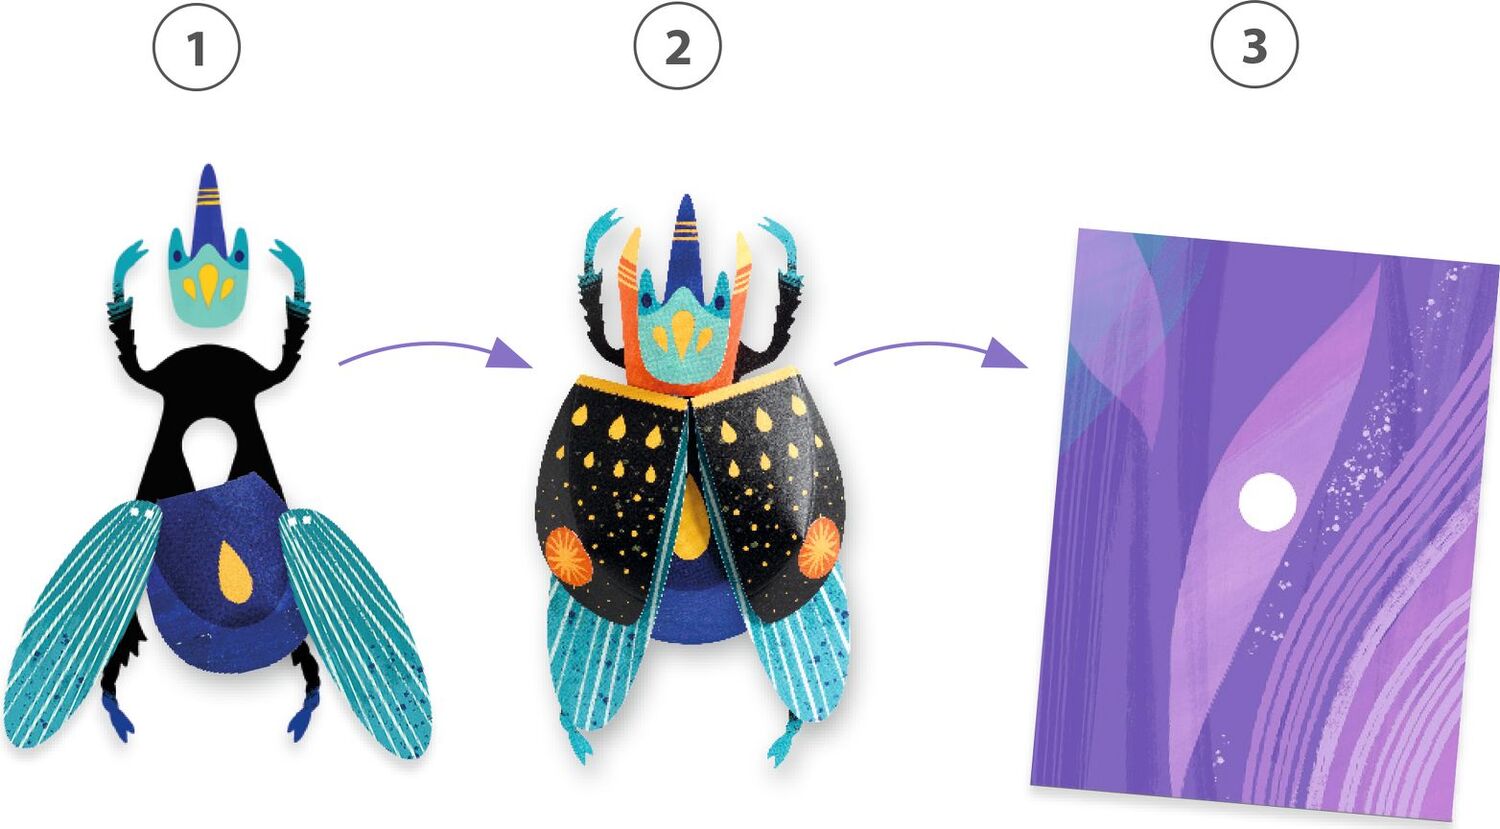 DJECO Paper Bugs Paper Creation